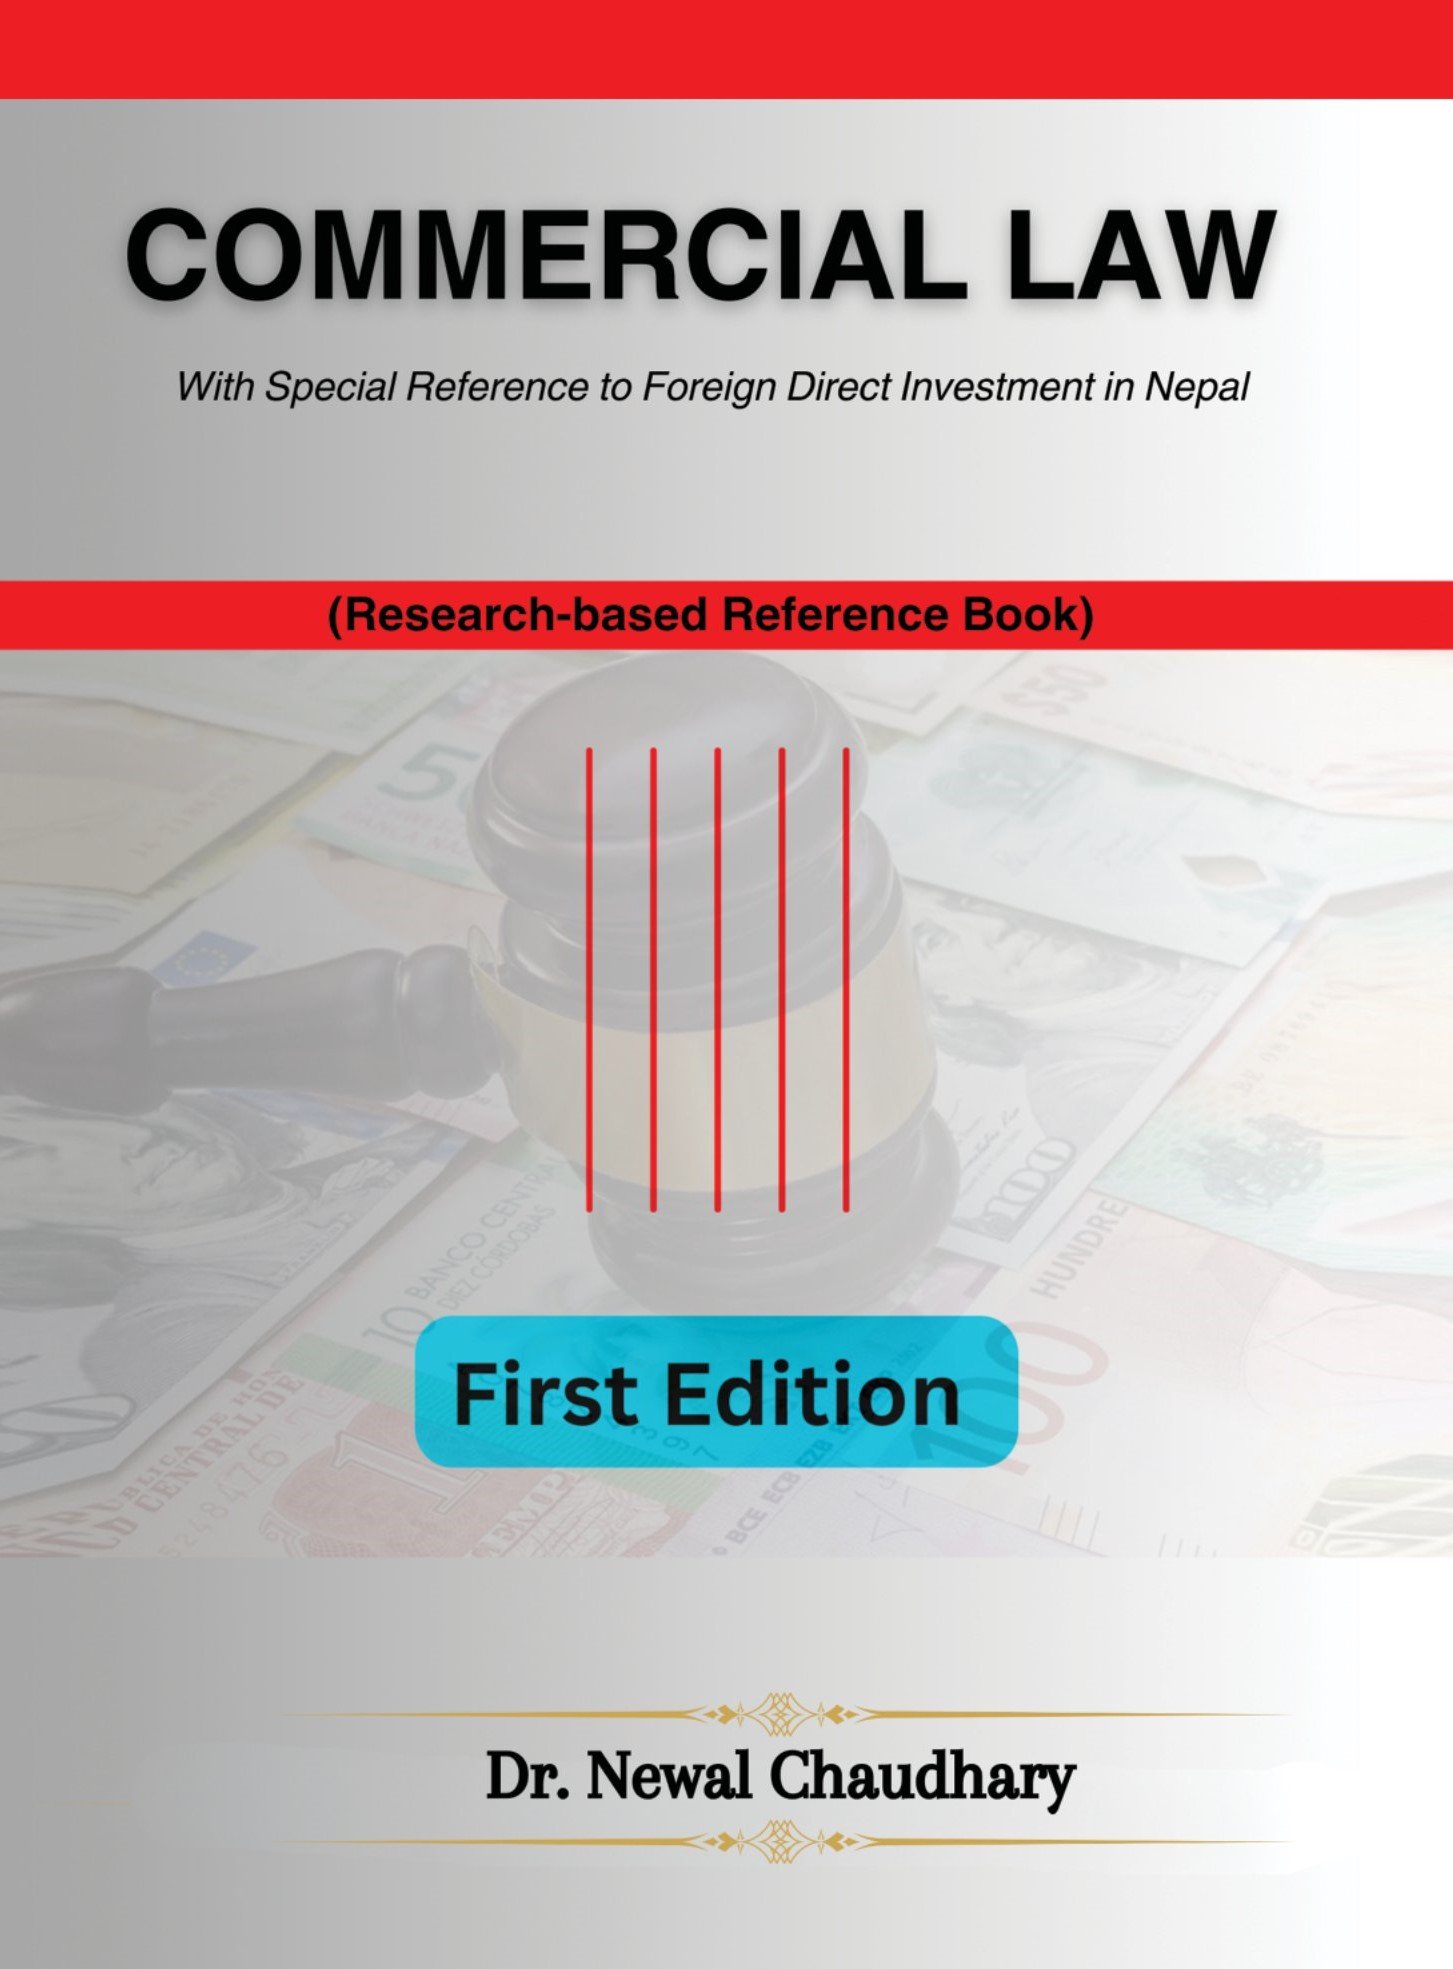 Book Review of Commercial Law, with Special Reference to Foreign Direct Investment in Nepal